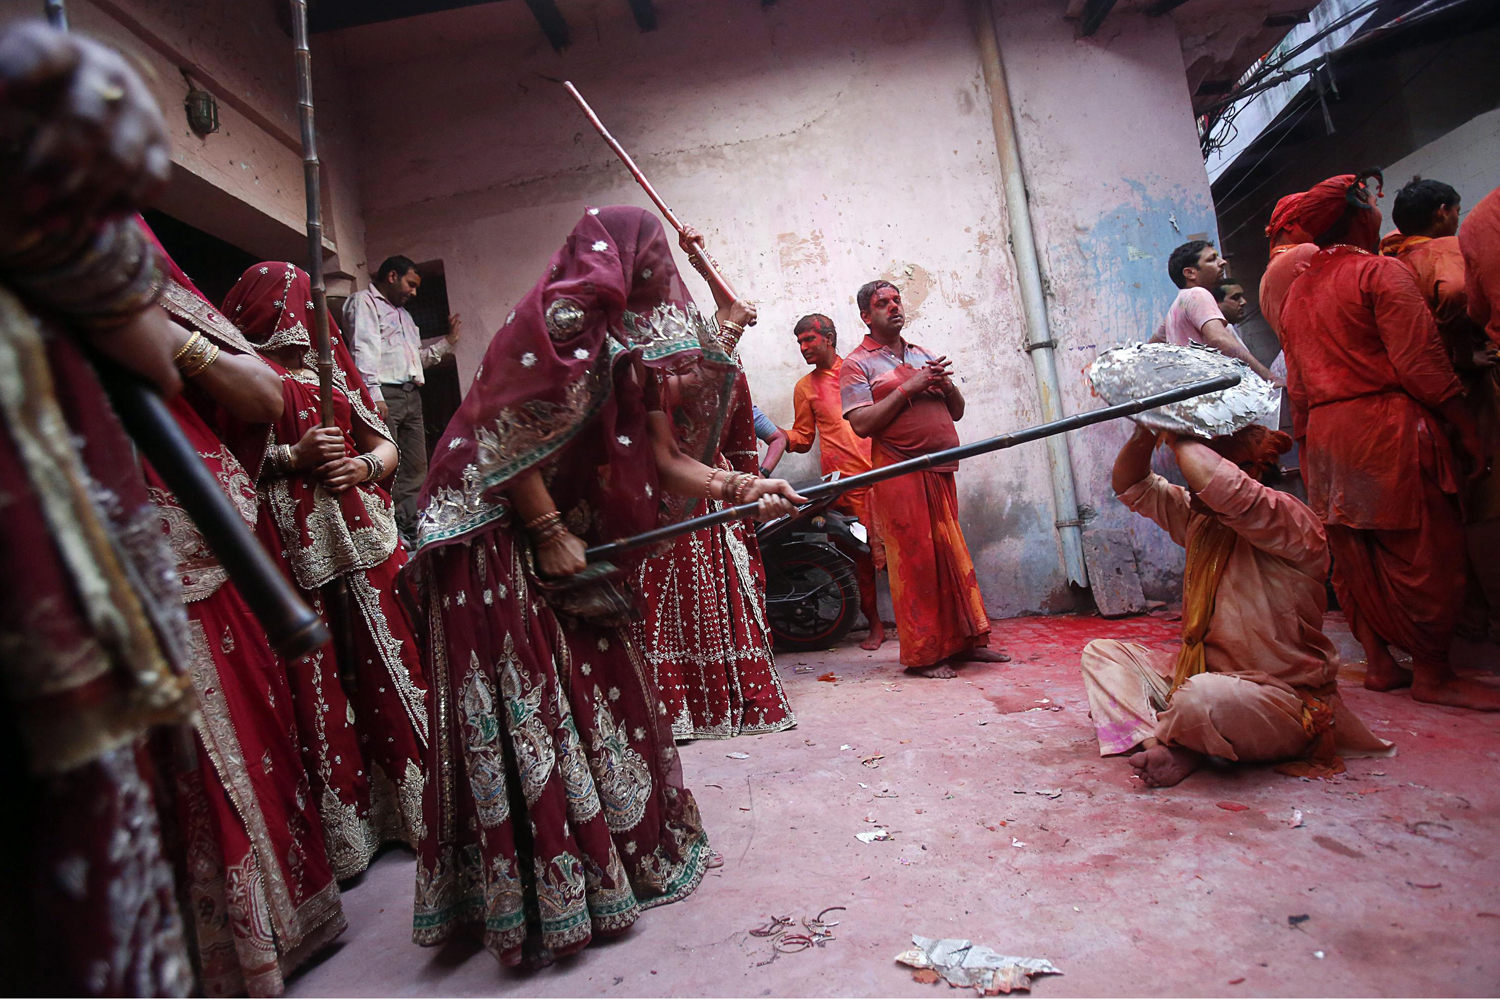 A group of women beat a man holding a shield over his head with sticks during Lathmar Holi at the village of Barsana